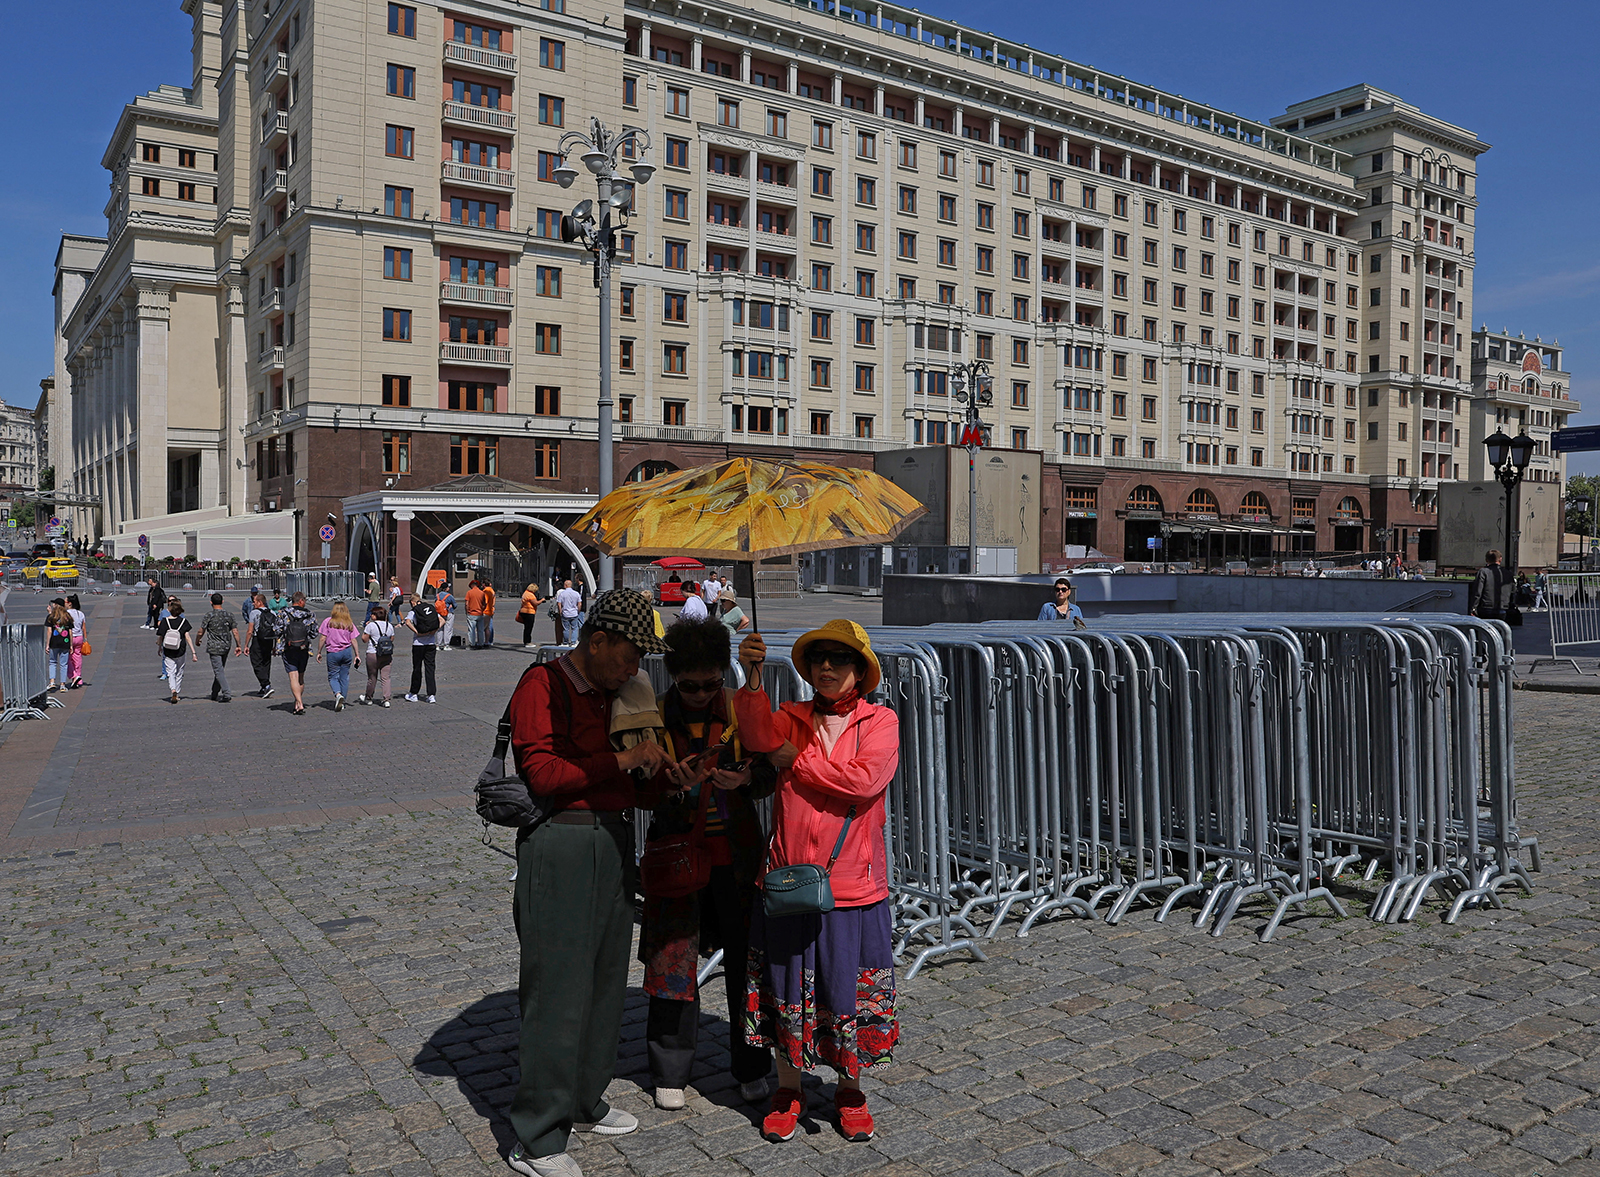 People stand near the closed Red Square in Moscow, Russia on June 25.